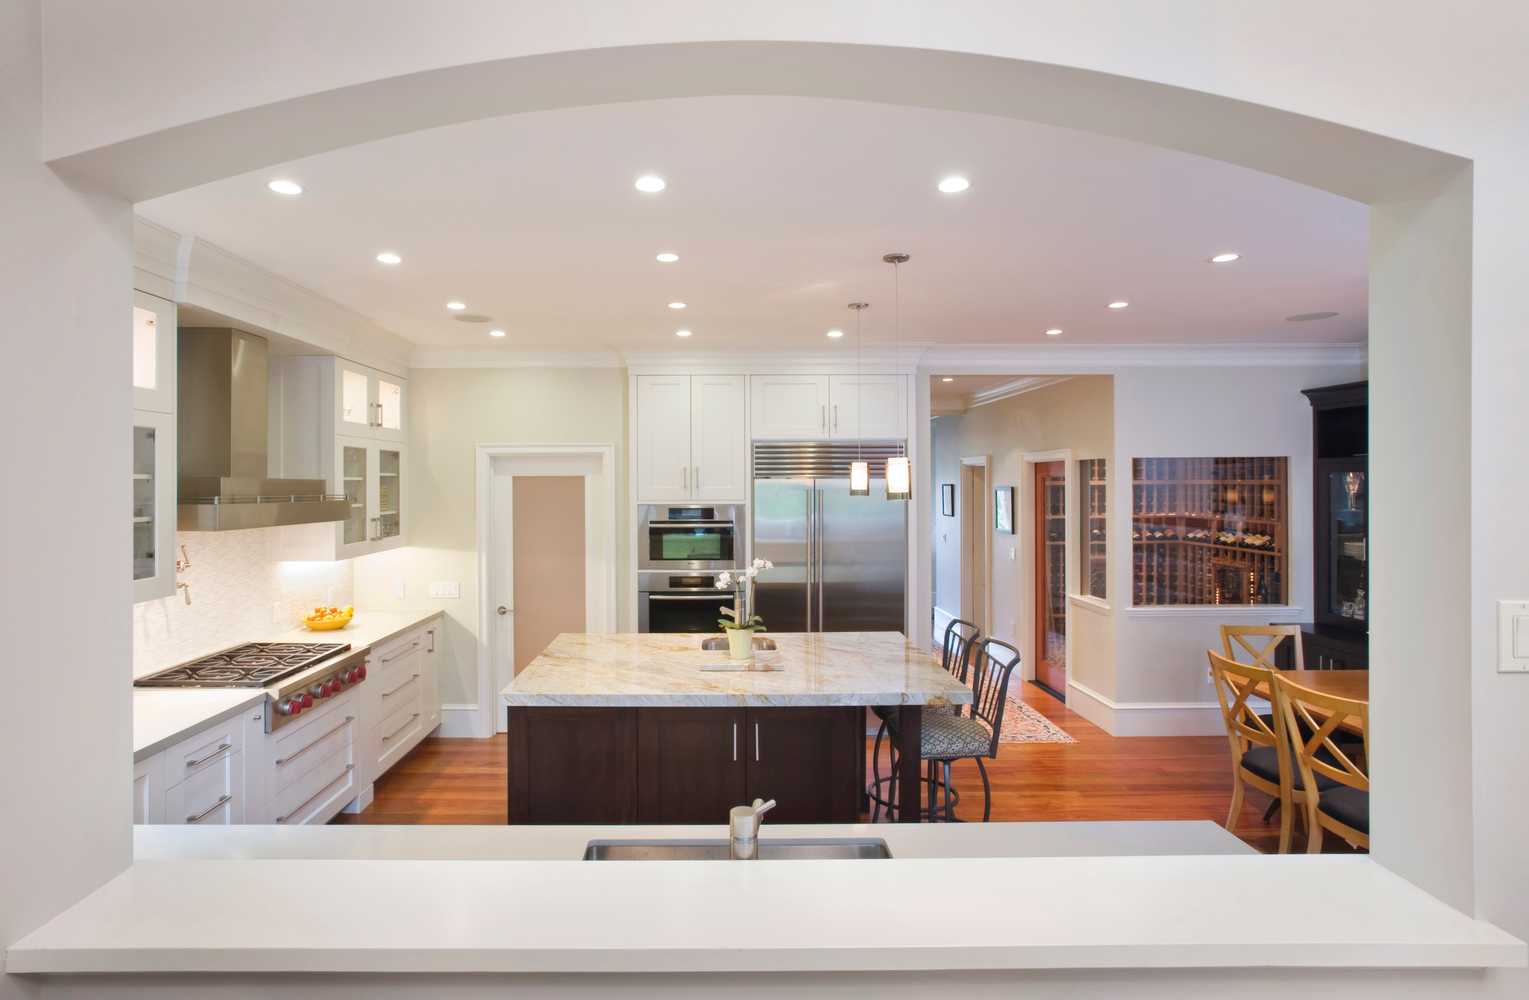 Kitchens from Gelling And Judd Inc